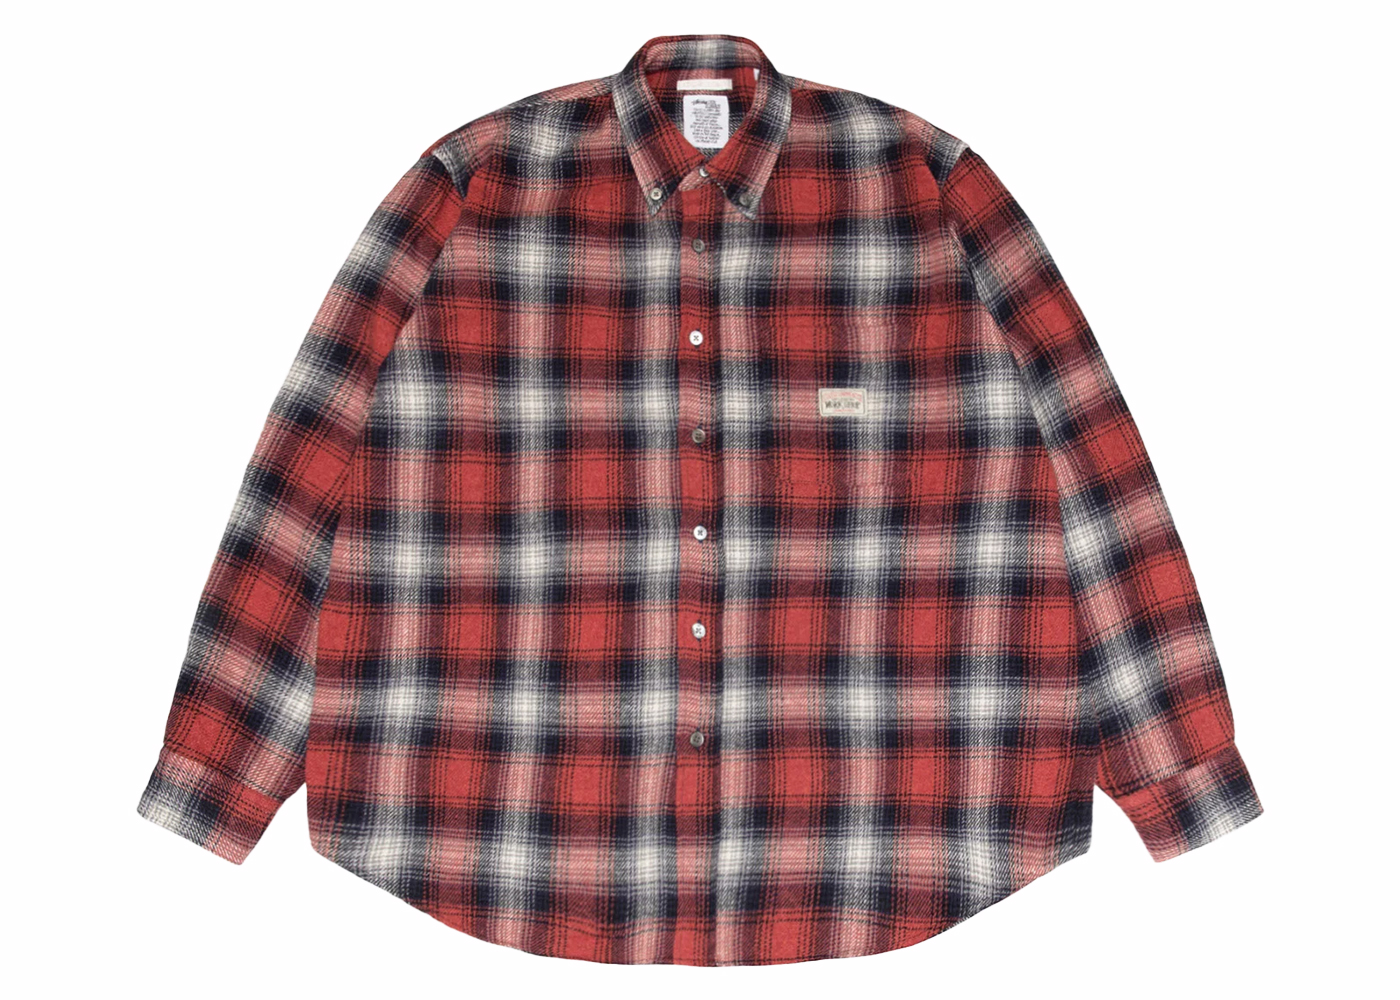 Stussy x Our Legacy Work Shop Shirt Red Arborist Check メンズ ...